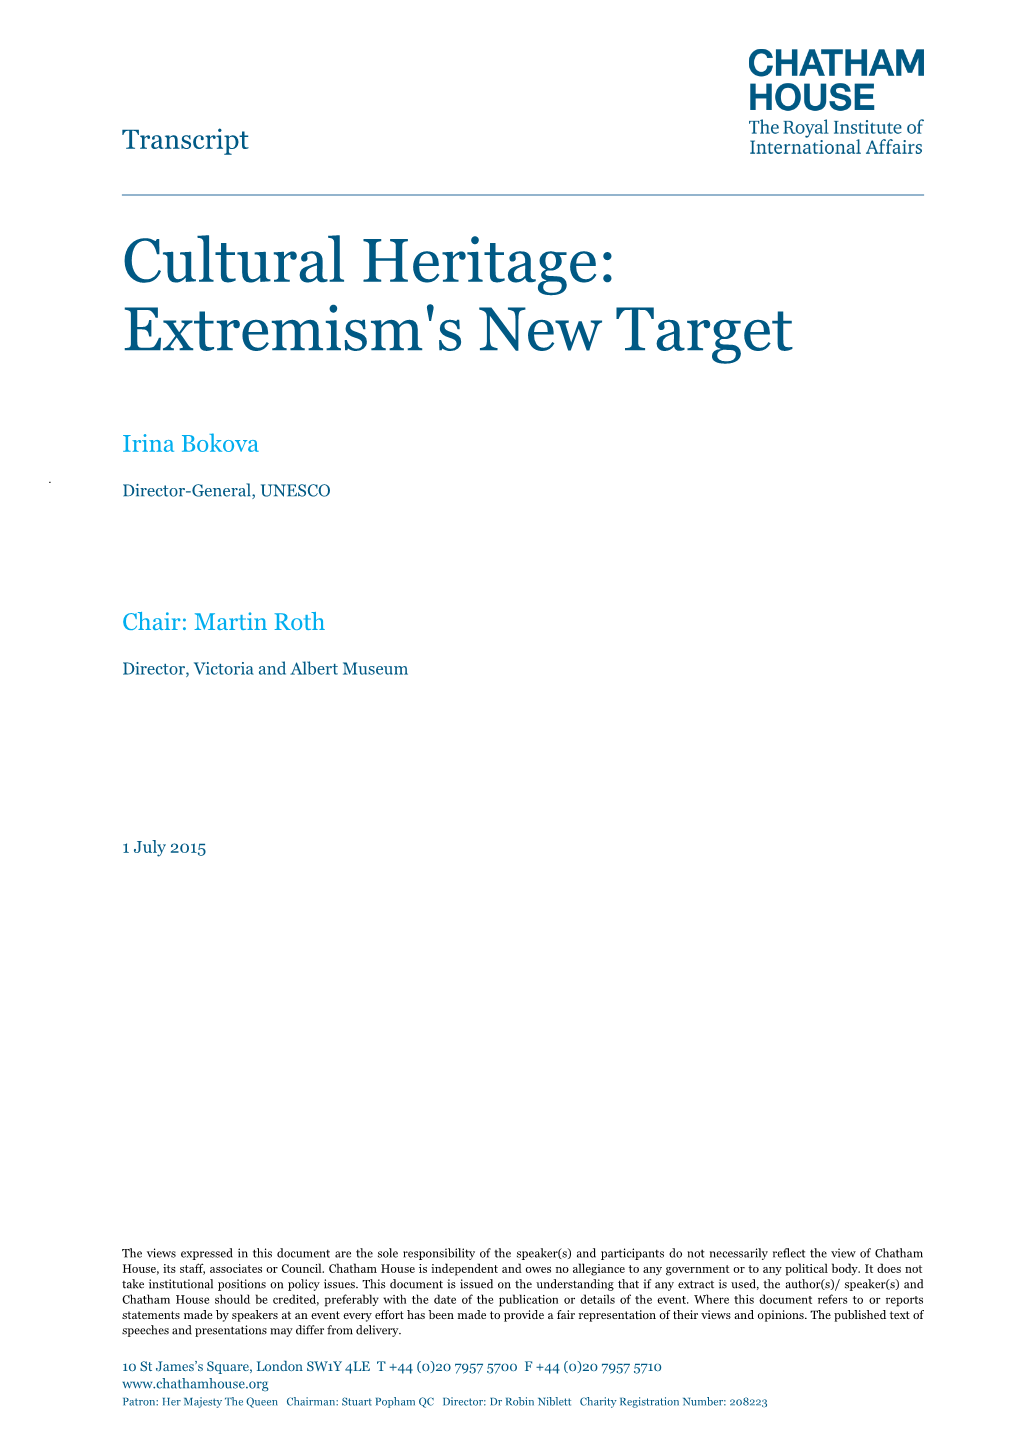 Cultural Heritage: Extremism's New Target